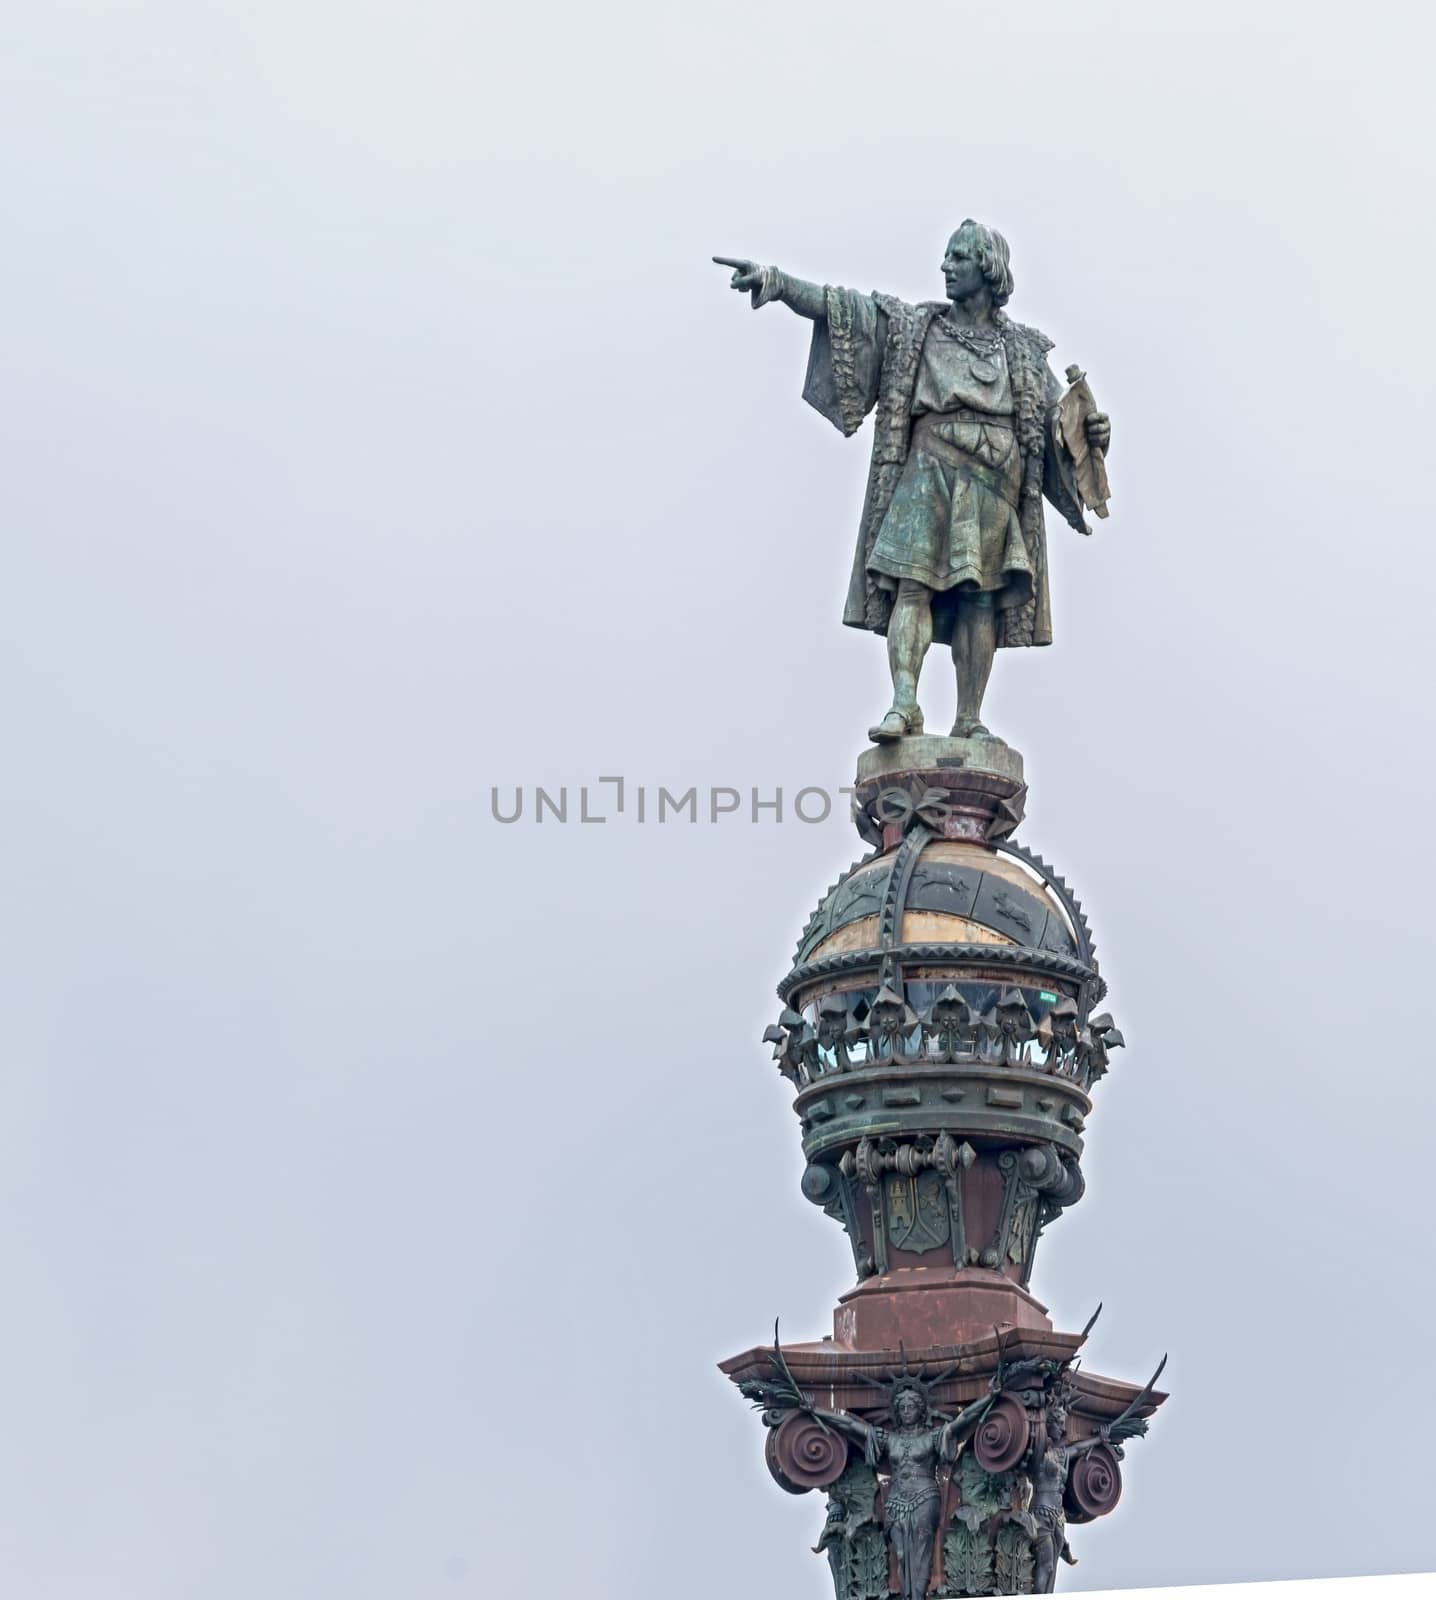 Statue of Christopher Columbus in Barcelona, Spain by Marcus